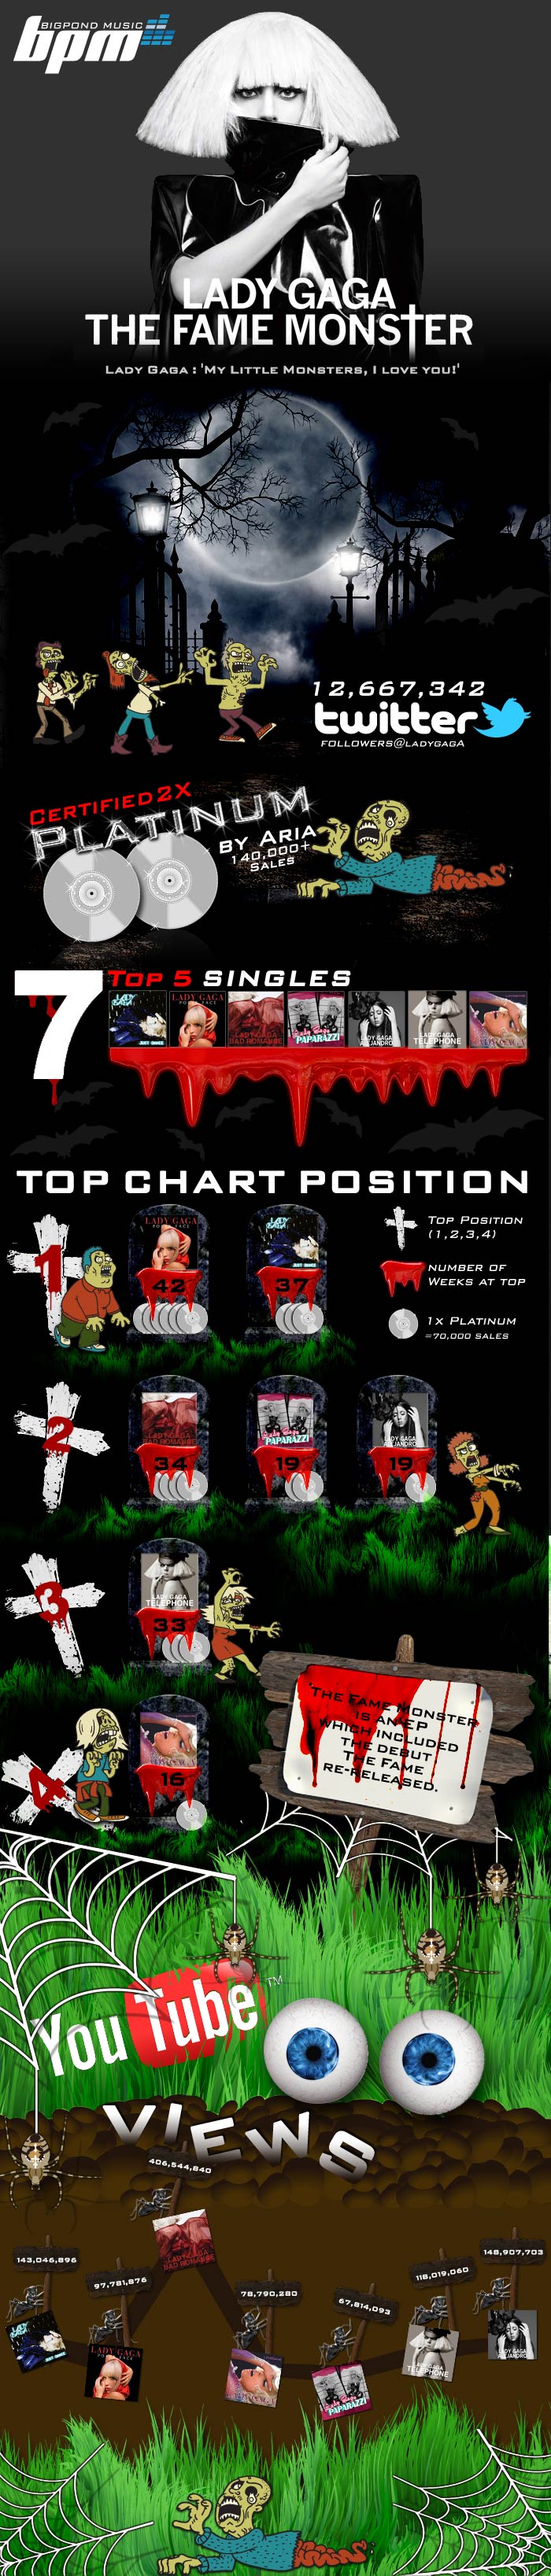 Lady Gaga The Fame Monster Halloween Top Charts